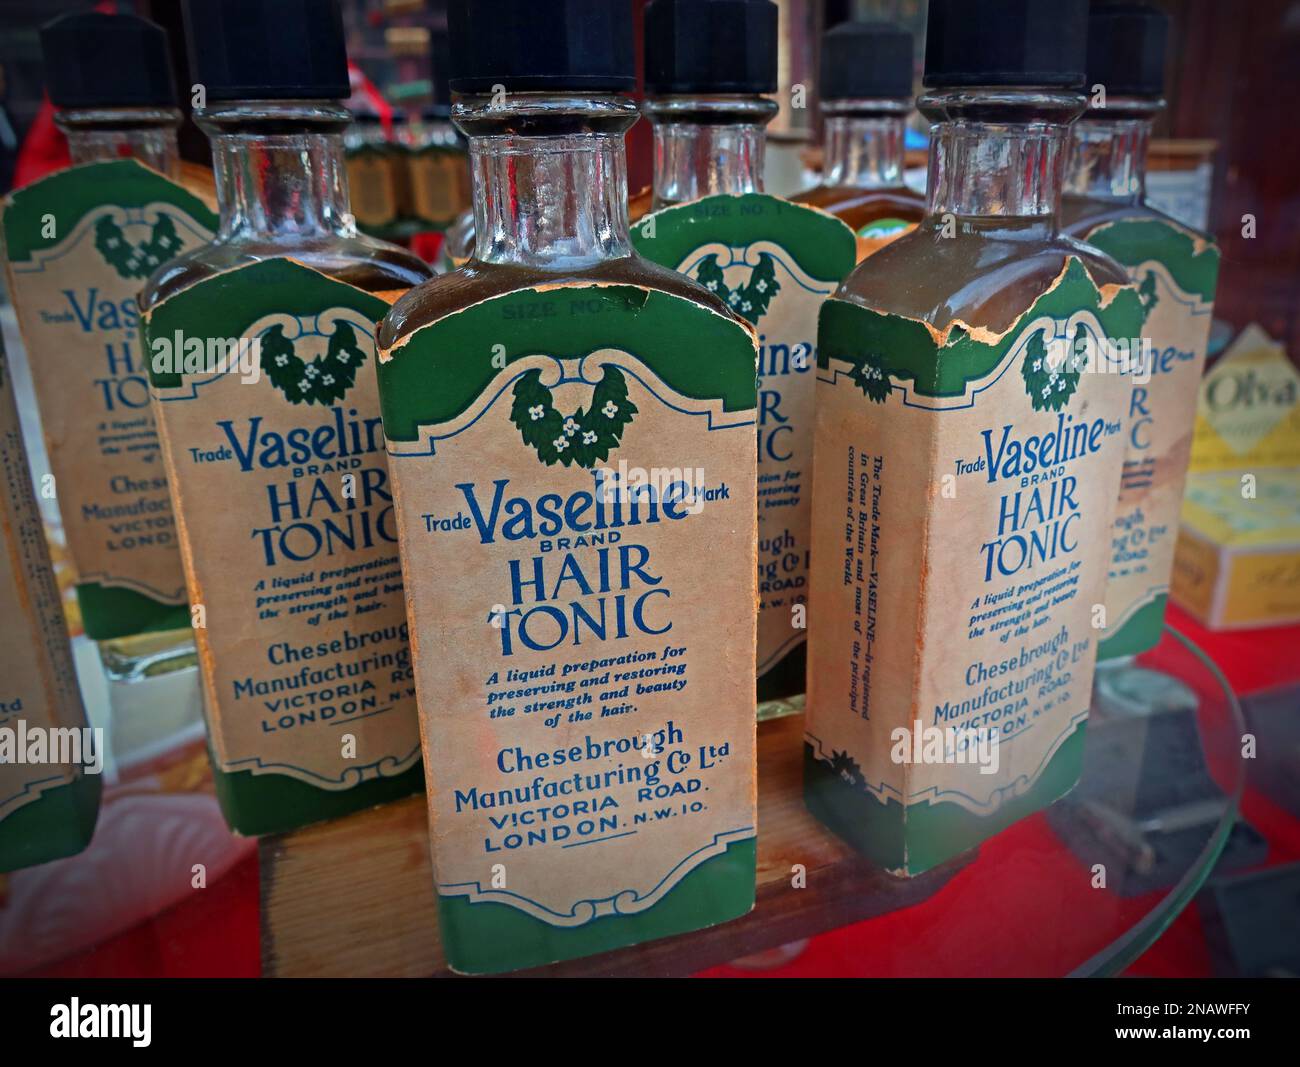 Old Bottles of medicinal Vaseline brand (trade marked) hair tonic, Cheesebrough manufacturing Co Ltd, Victoria Road, London NW10, England, UK Stock Photo